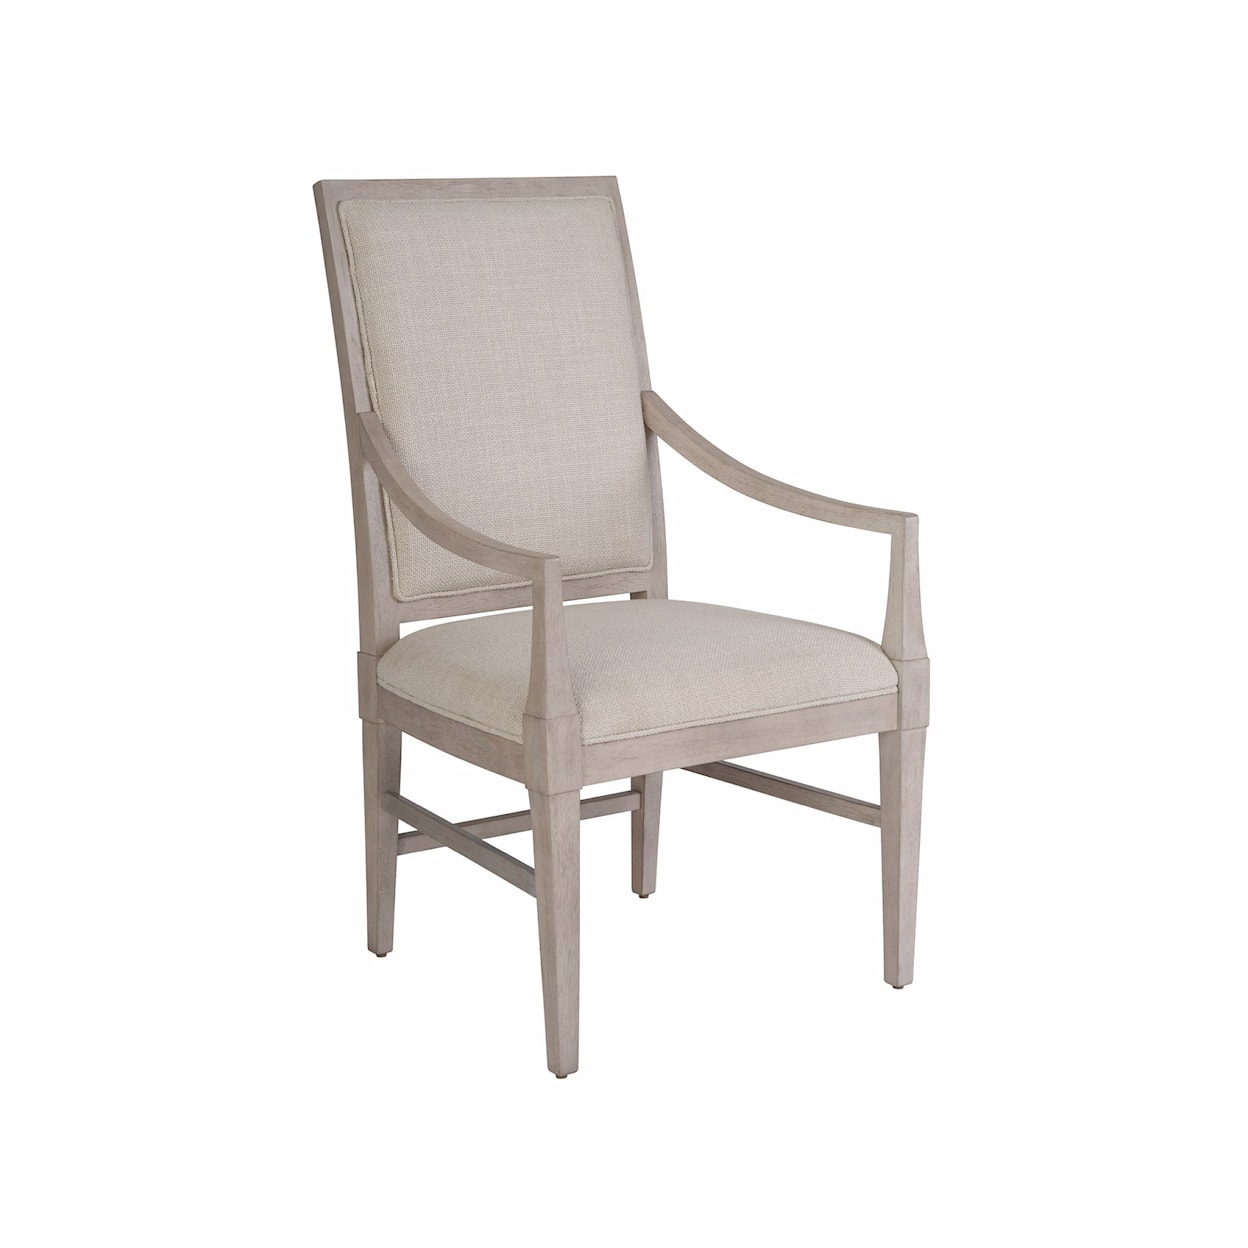 Universal COALESCE Upholstered Dining Chair